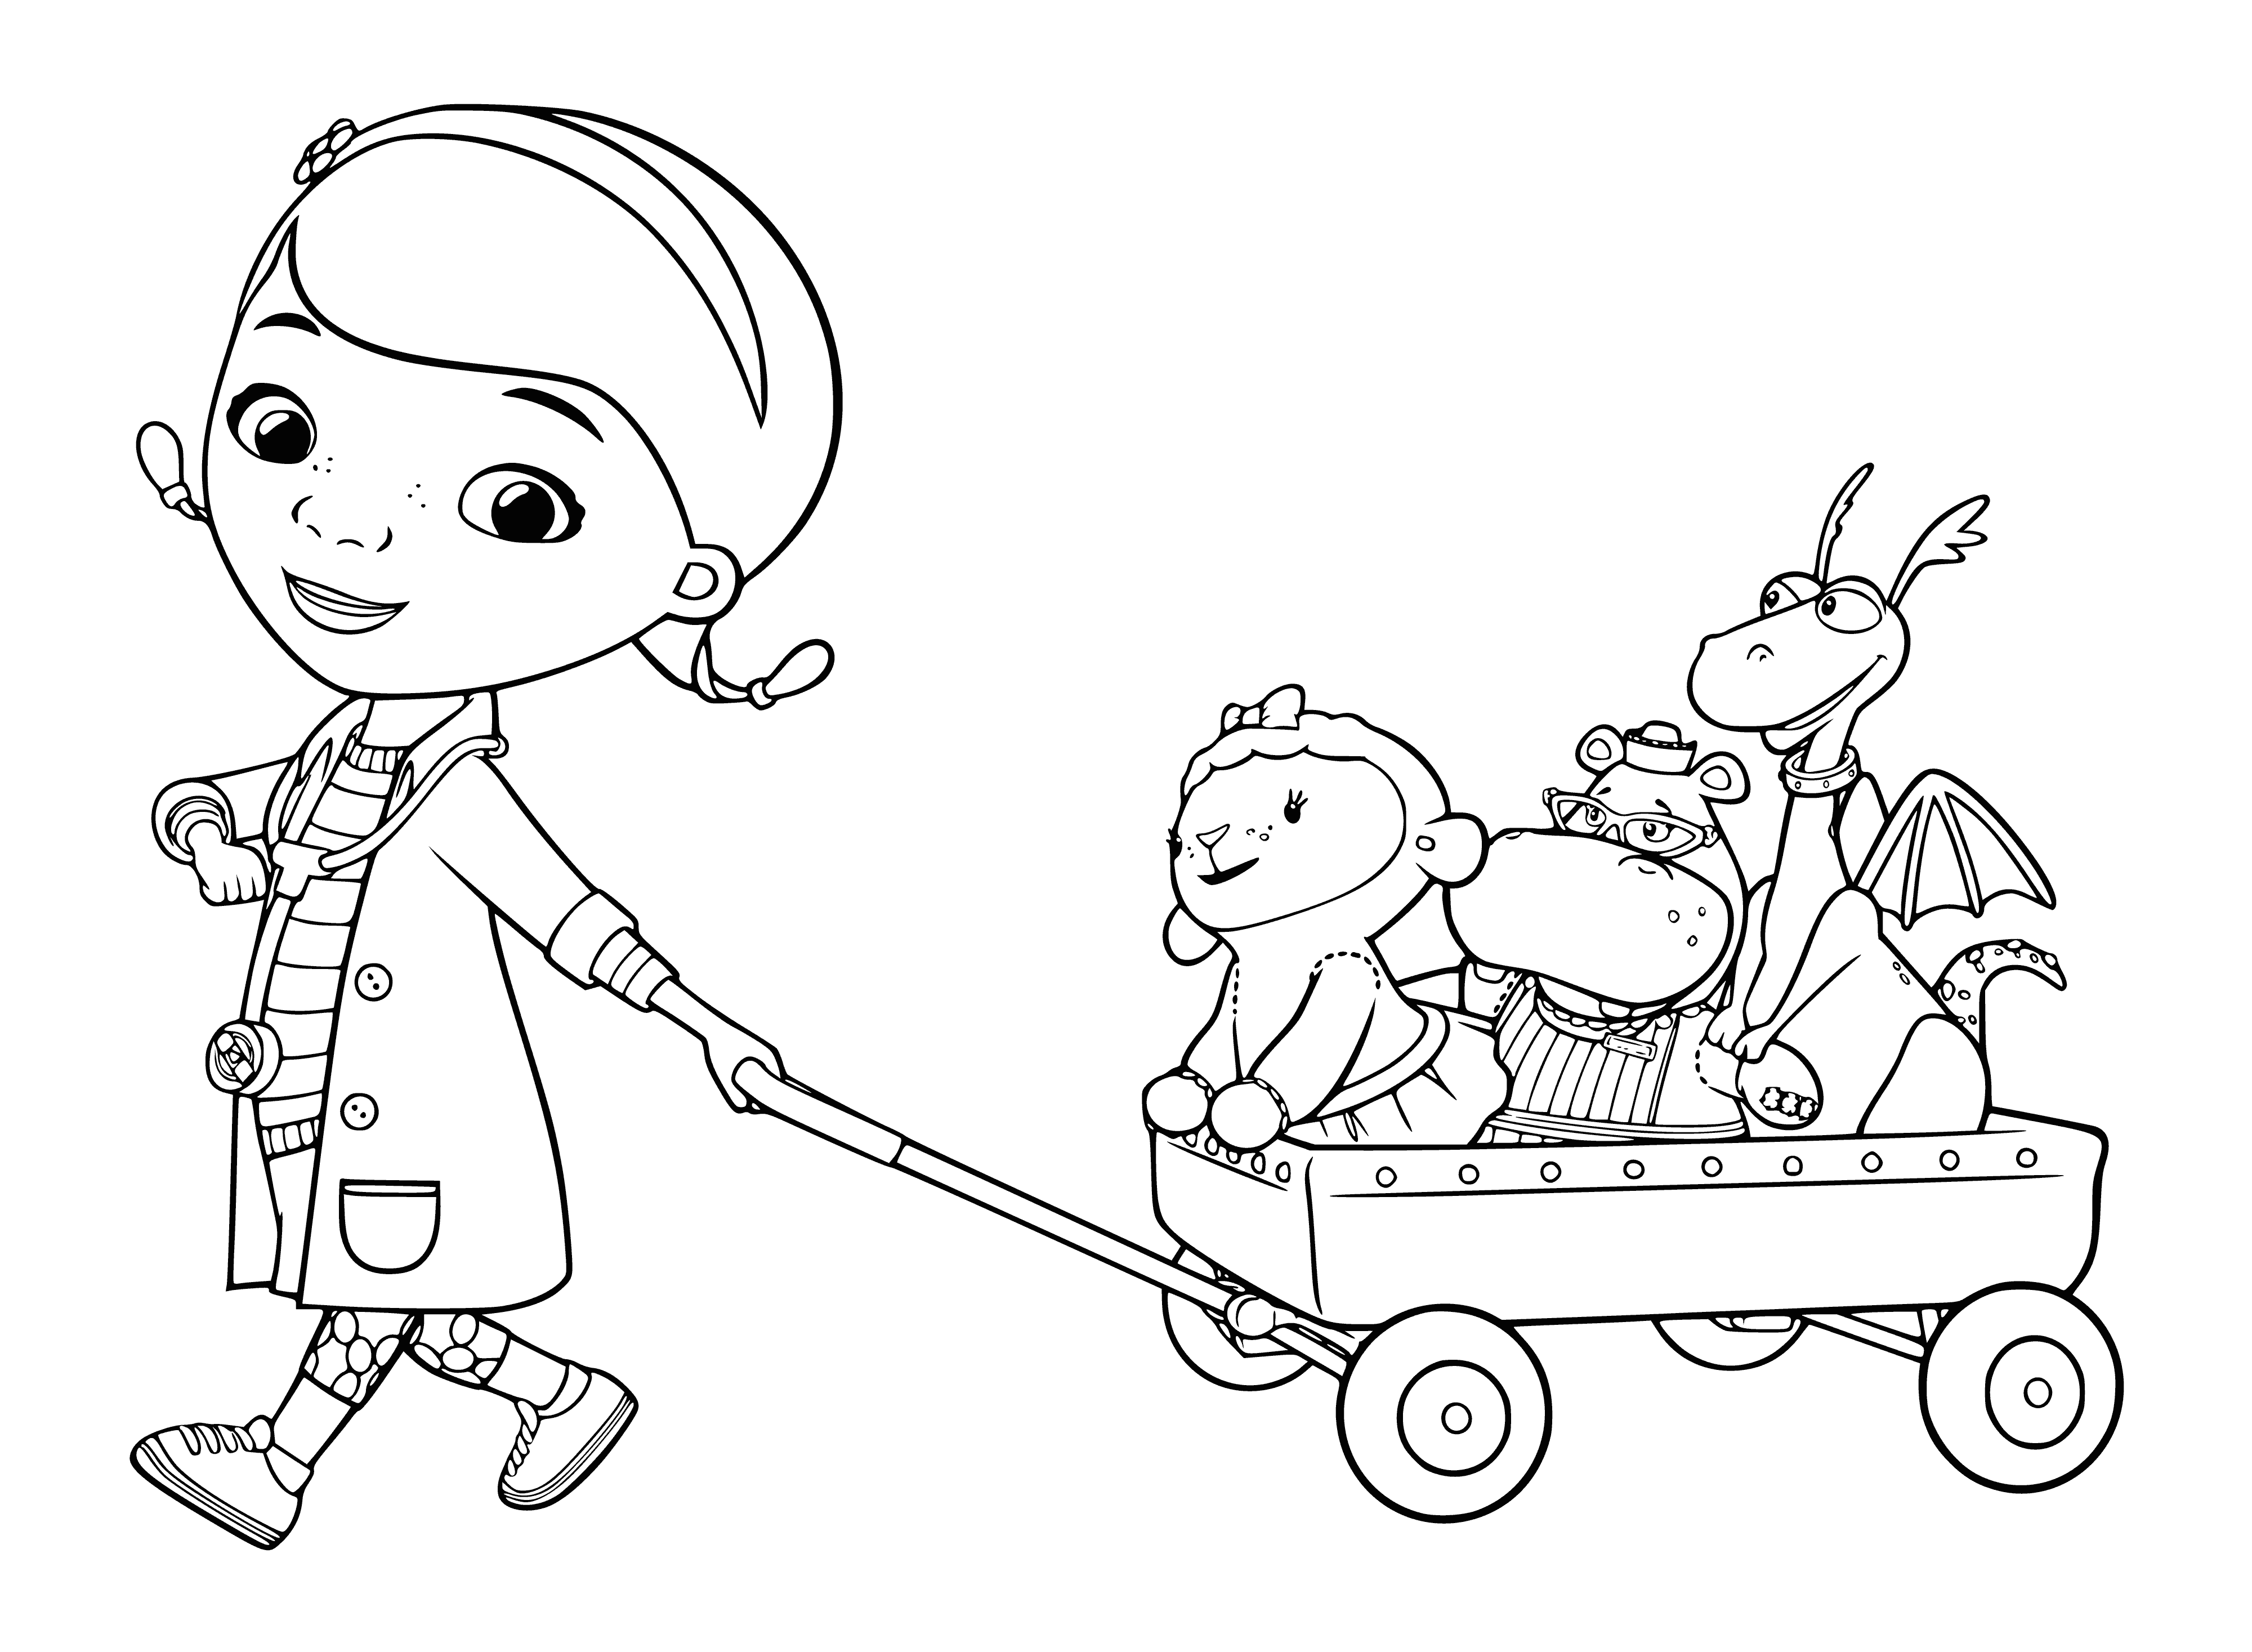 coloring page: Doc McStuffins is a doctor who helps her friends. She's surrounded by happy, healthy stuffed animal pals in a coloring page. #kidsactivities